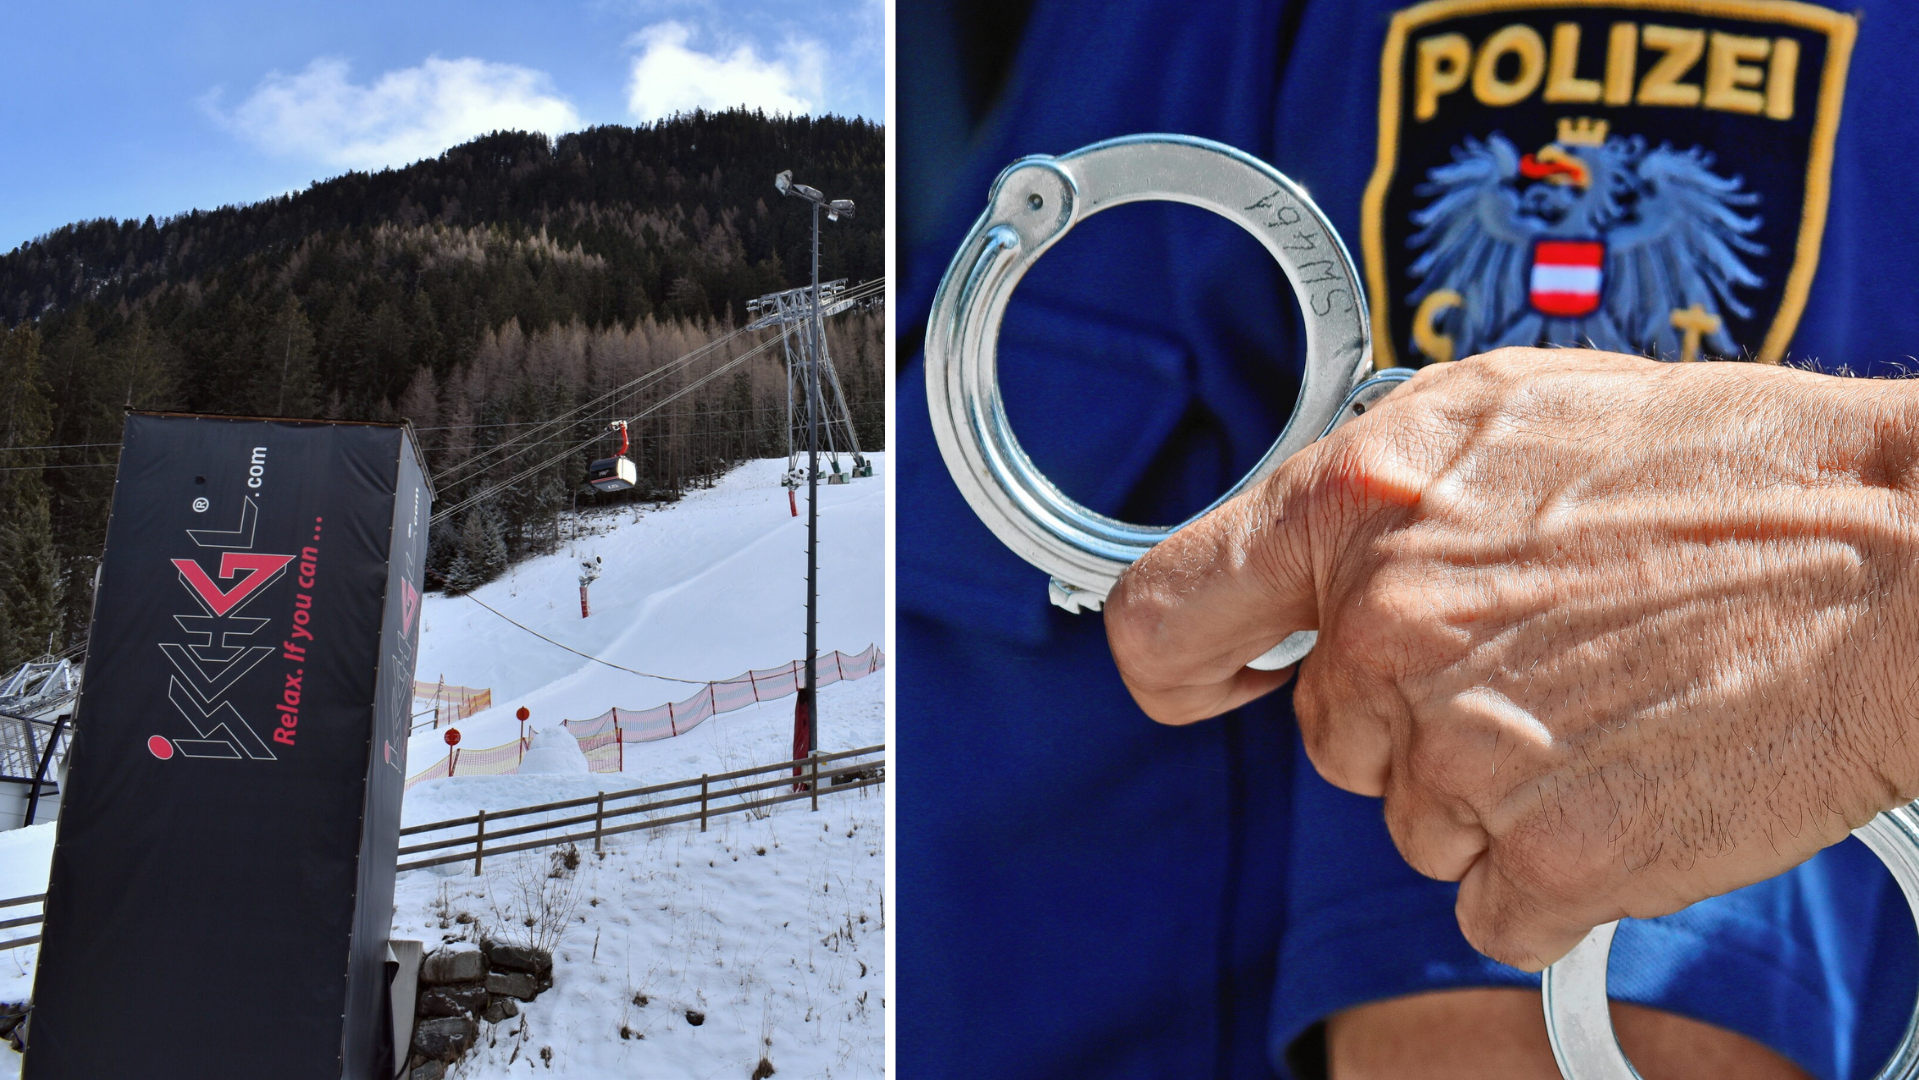 In Ischgl, the man looked too deeply into his glass. He became aggressive again when arrested. (Bild: Christof Birbaumer/Manuel Schwaiger/Krone KREATIV)